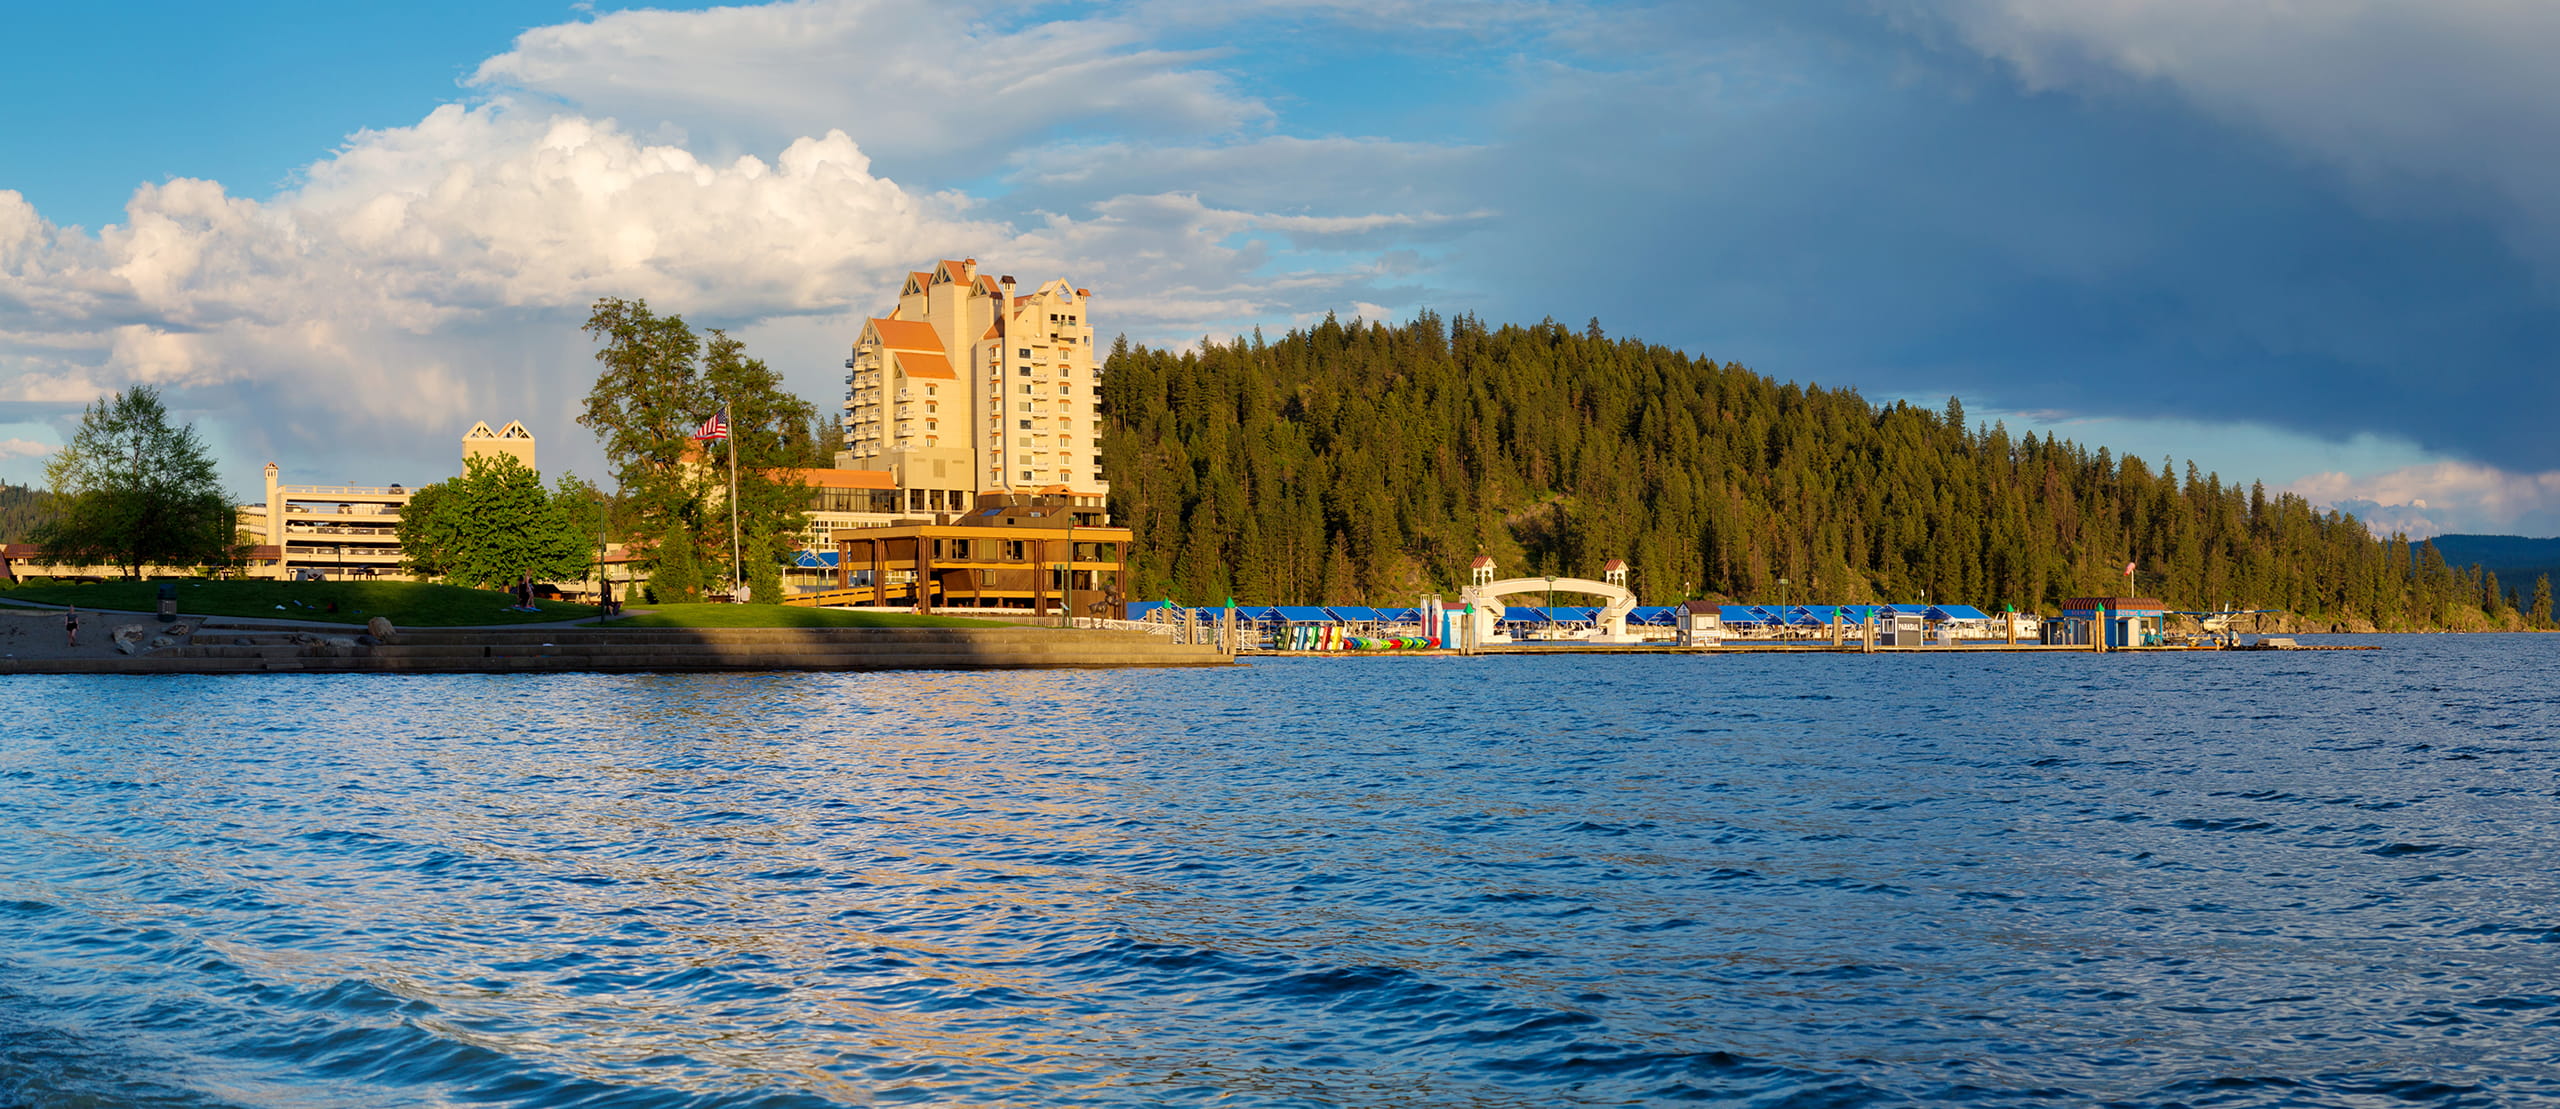 Panoramic view of Lake Coeur d'Alene shoreline with the Coeur d'Alene Resort visible, stormy spring evening skies